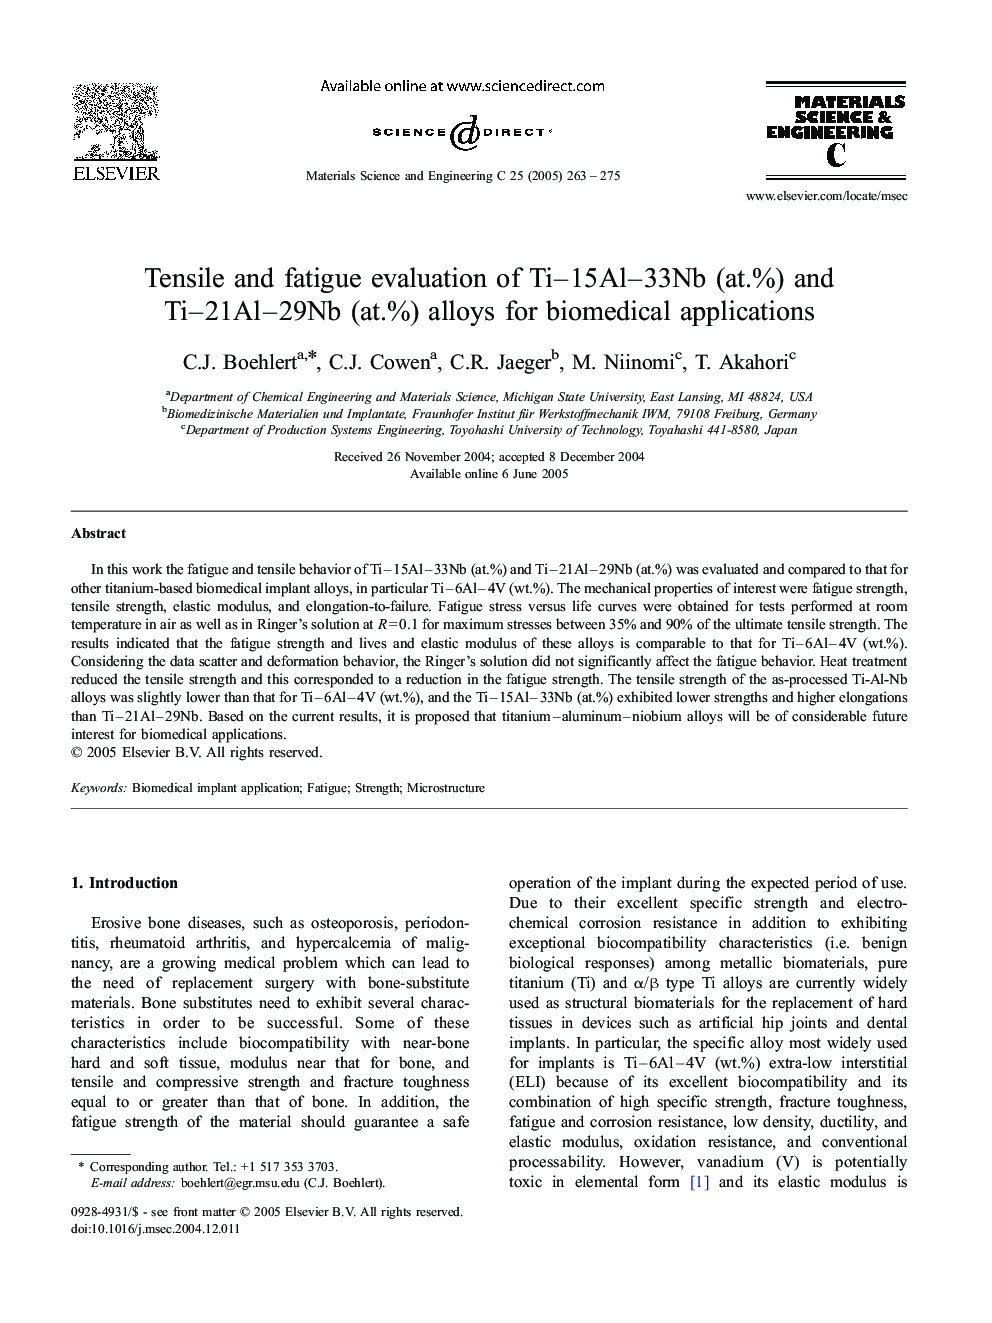 Tensile and fatigue evaluation of Ti-15Al-33Nb (at.%) and Ti-21Al-29Nb (at.%) alloys for biomedical applications